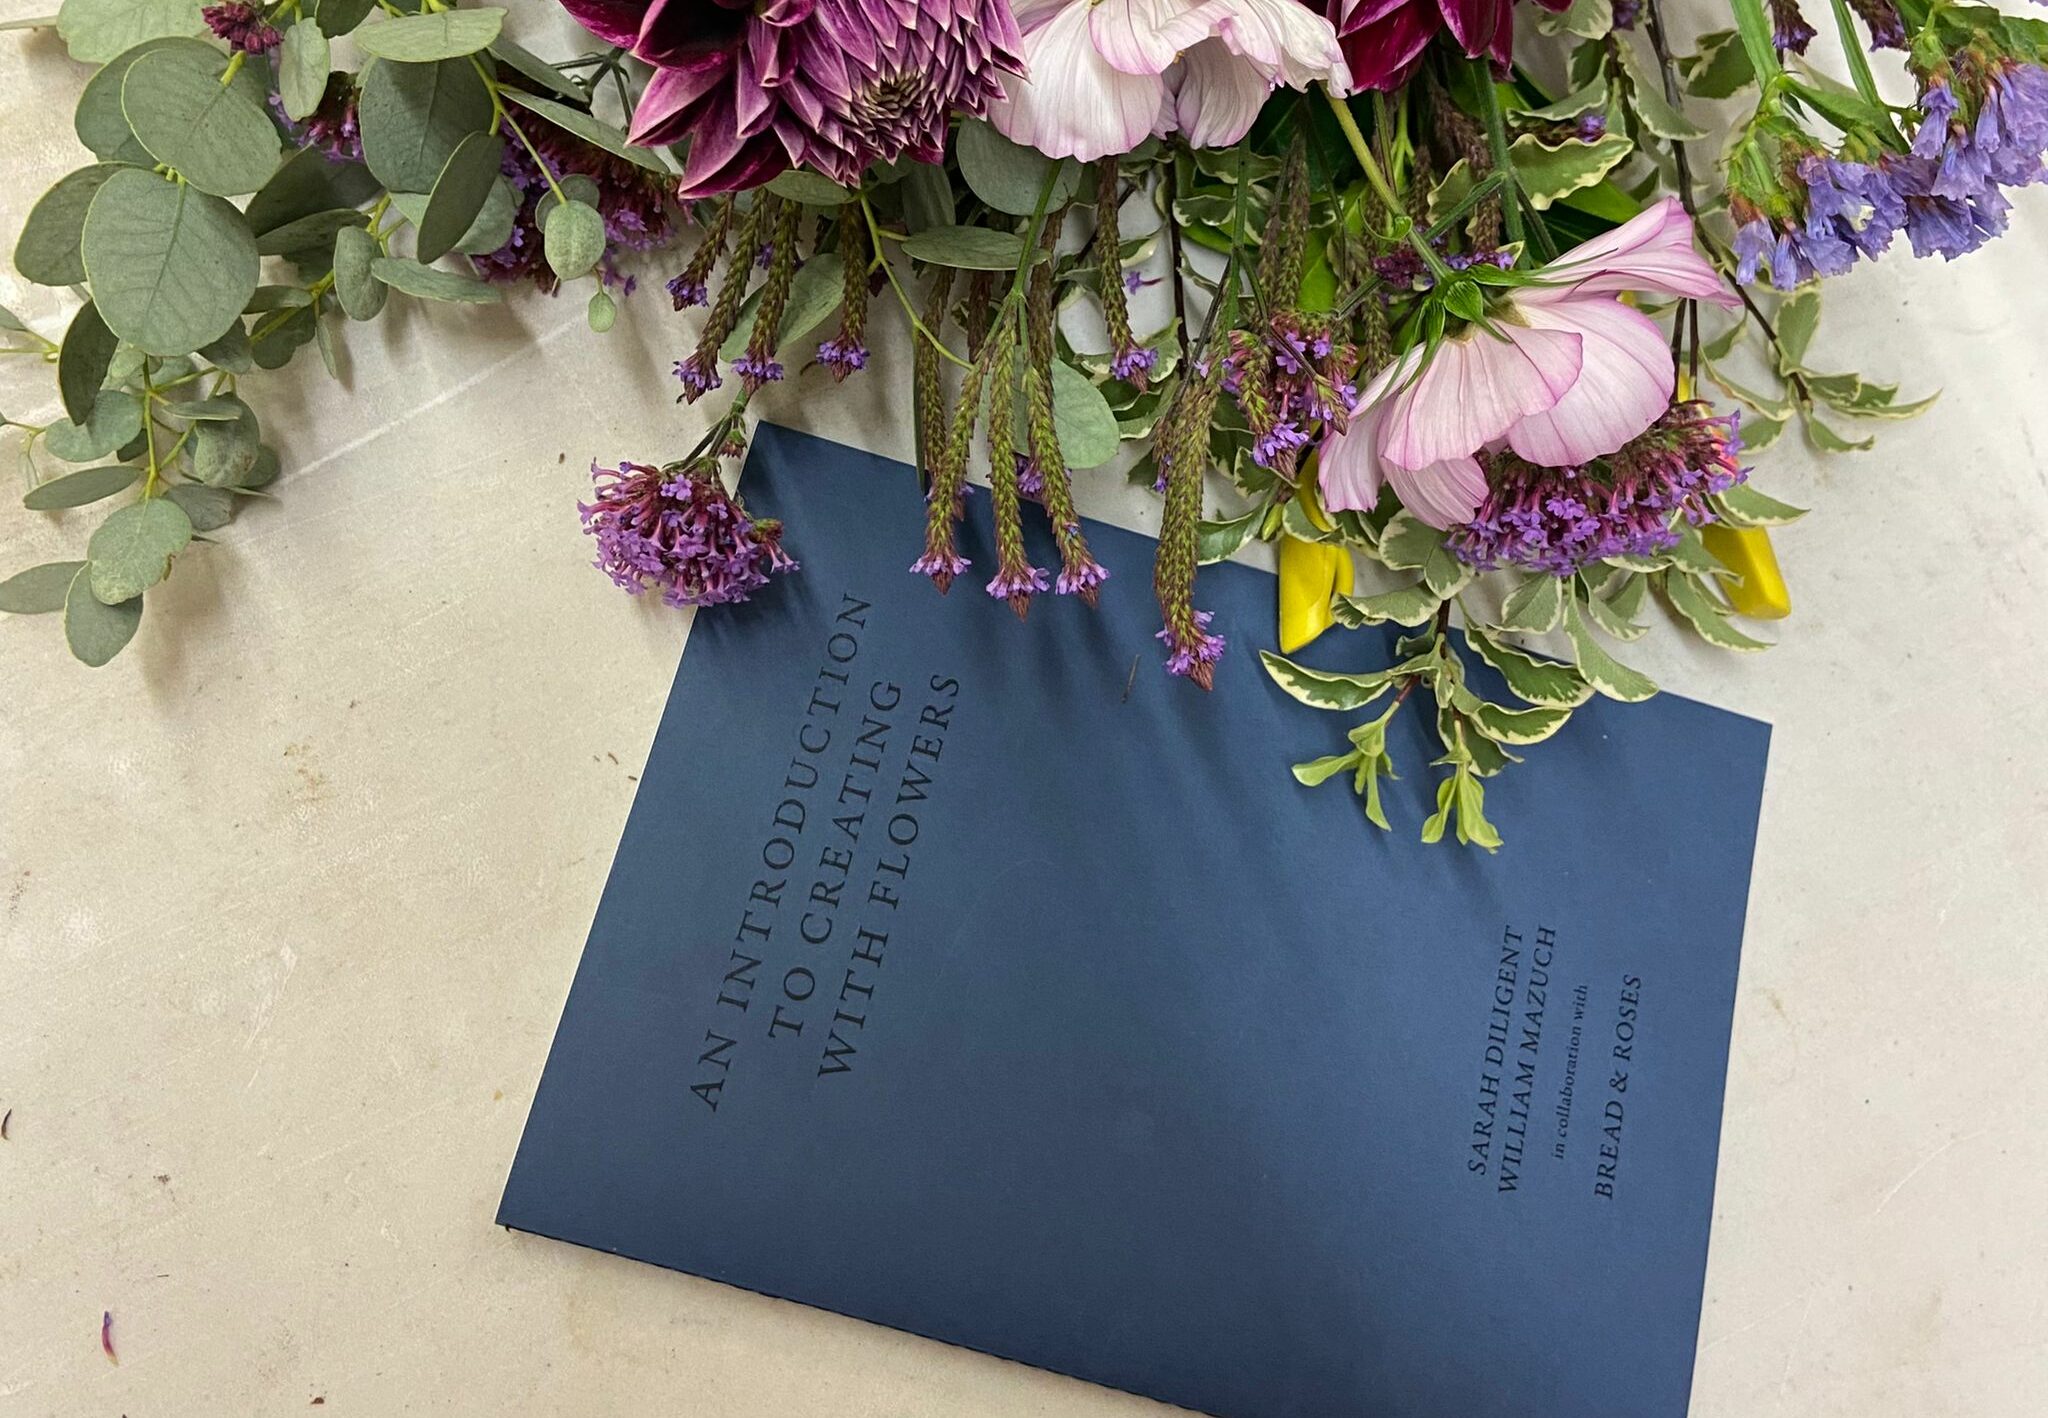 The handbook created specially for the Bread and Roses floristry courses by Sarah Diligent and William Mazuch